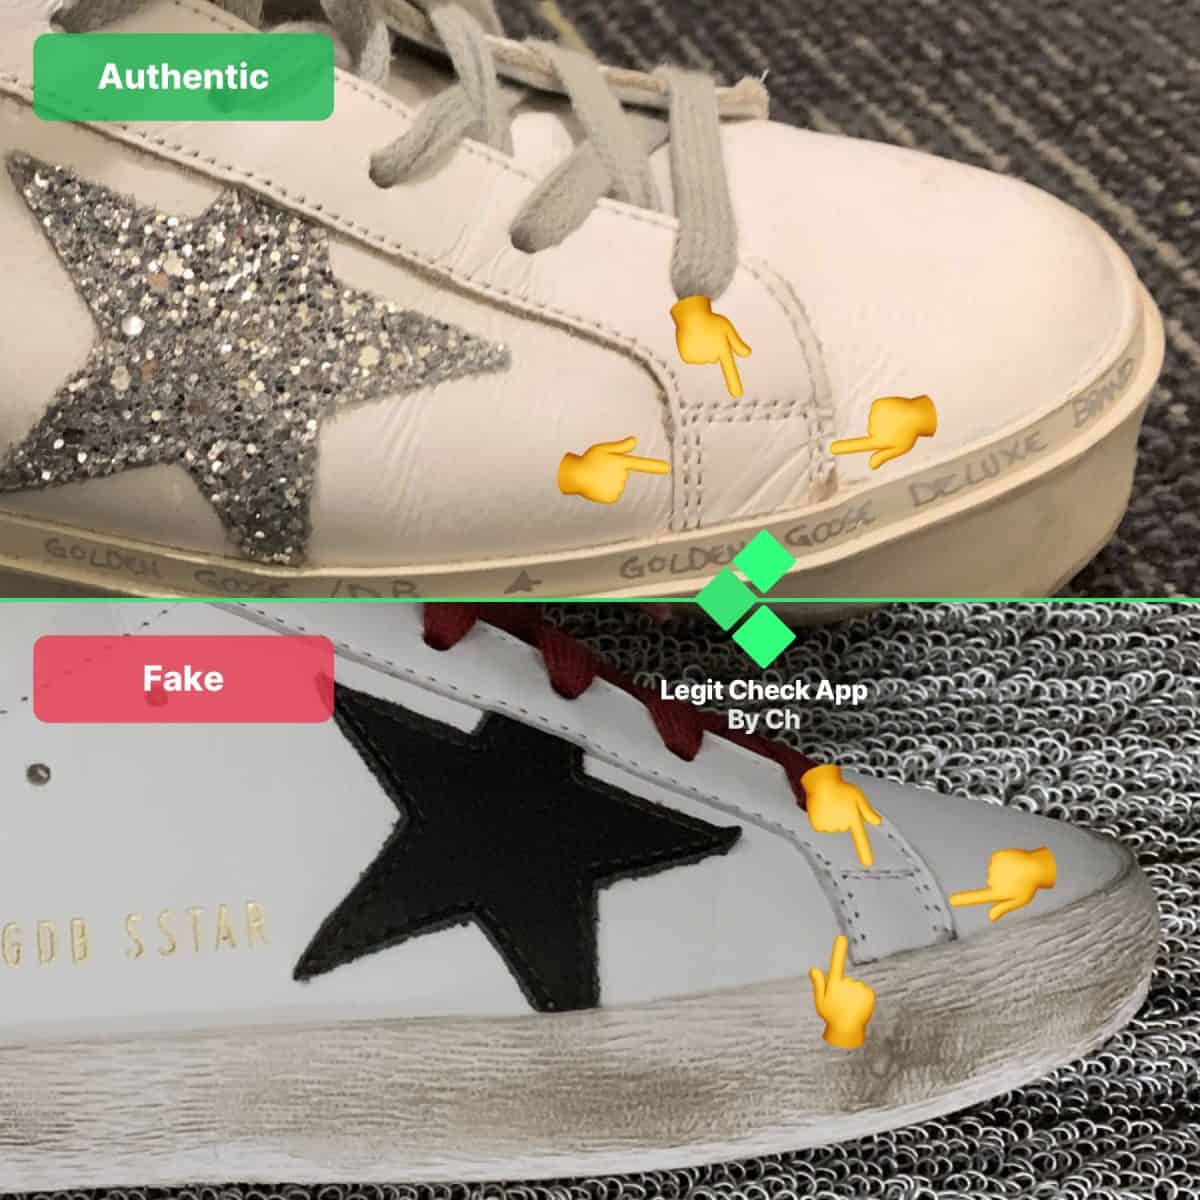 golden goose authenticity check guide